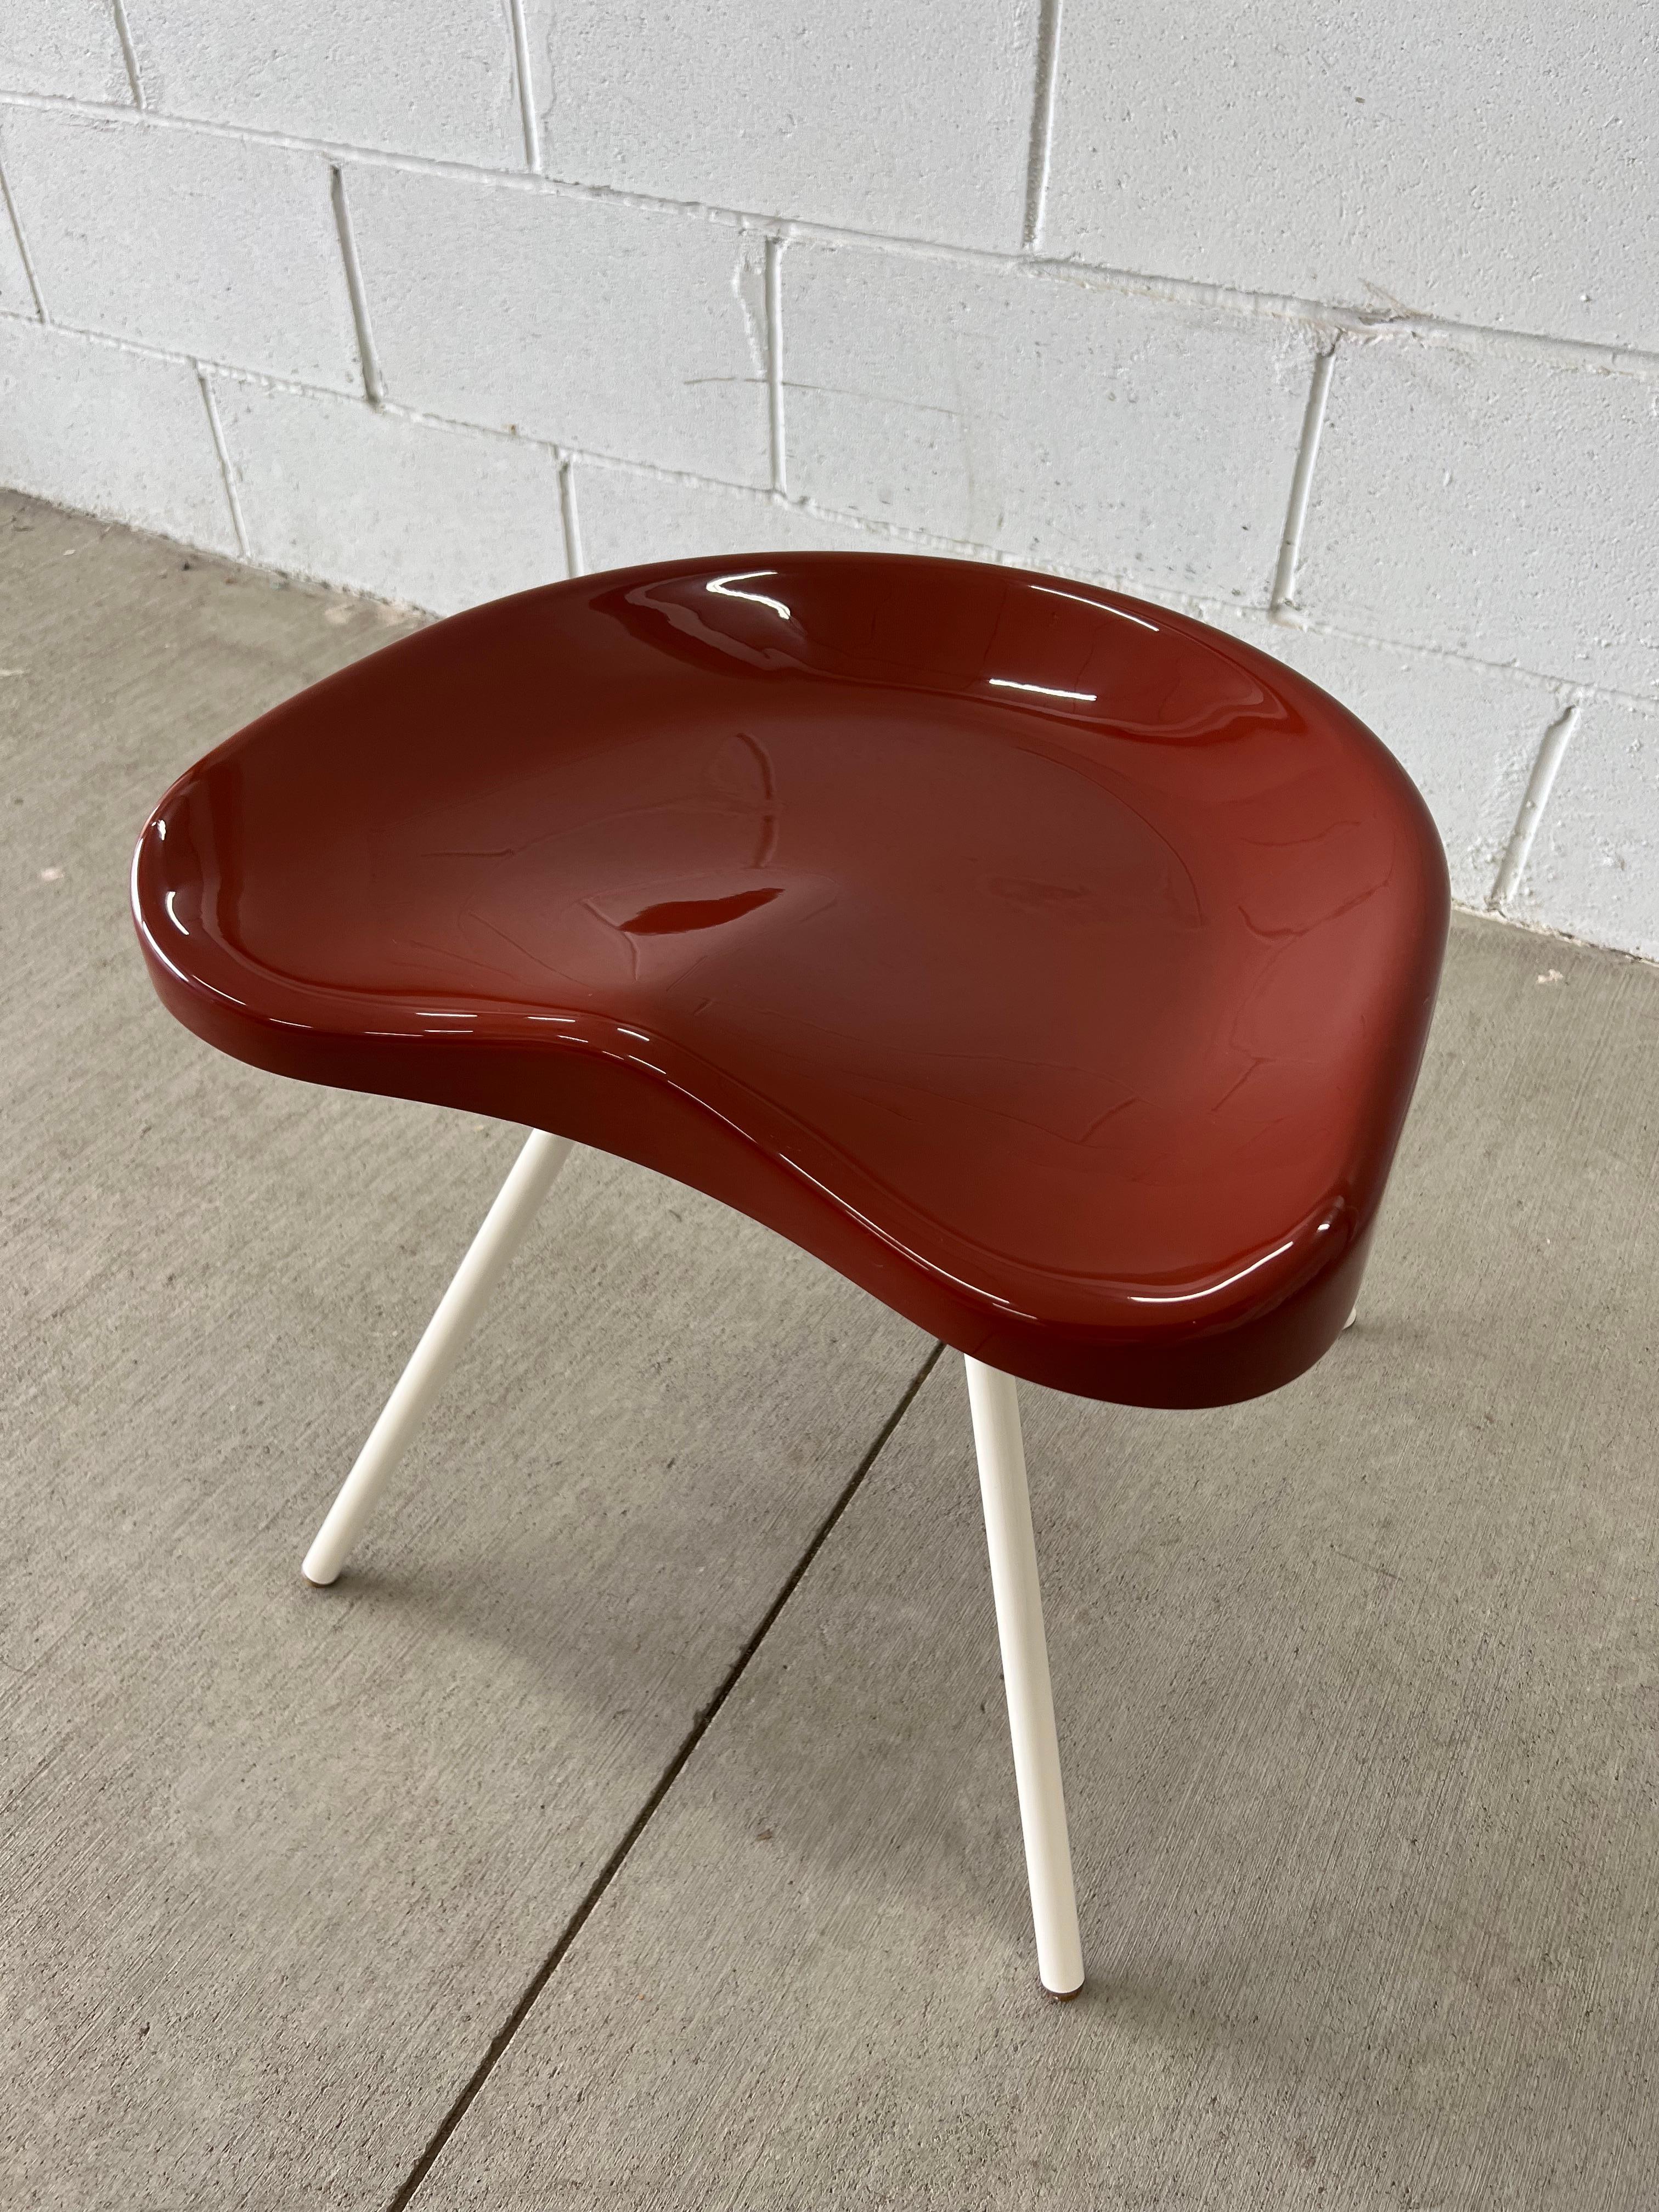 20th Century Prouvé Raw Tabouret 307 Stool by Jean Prouvé and G Star Raw for Vitra For Sale